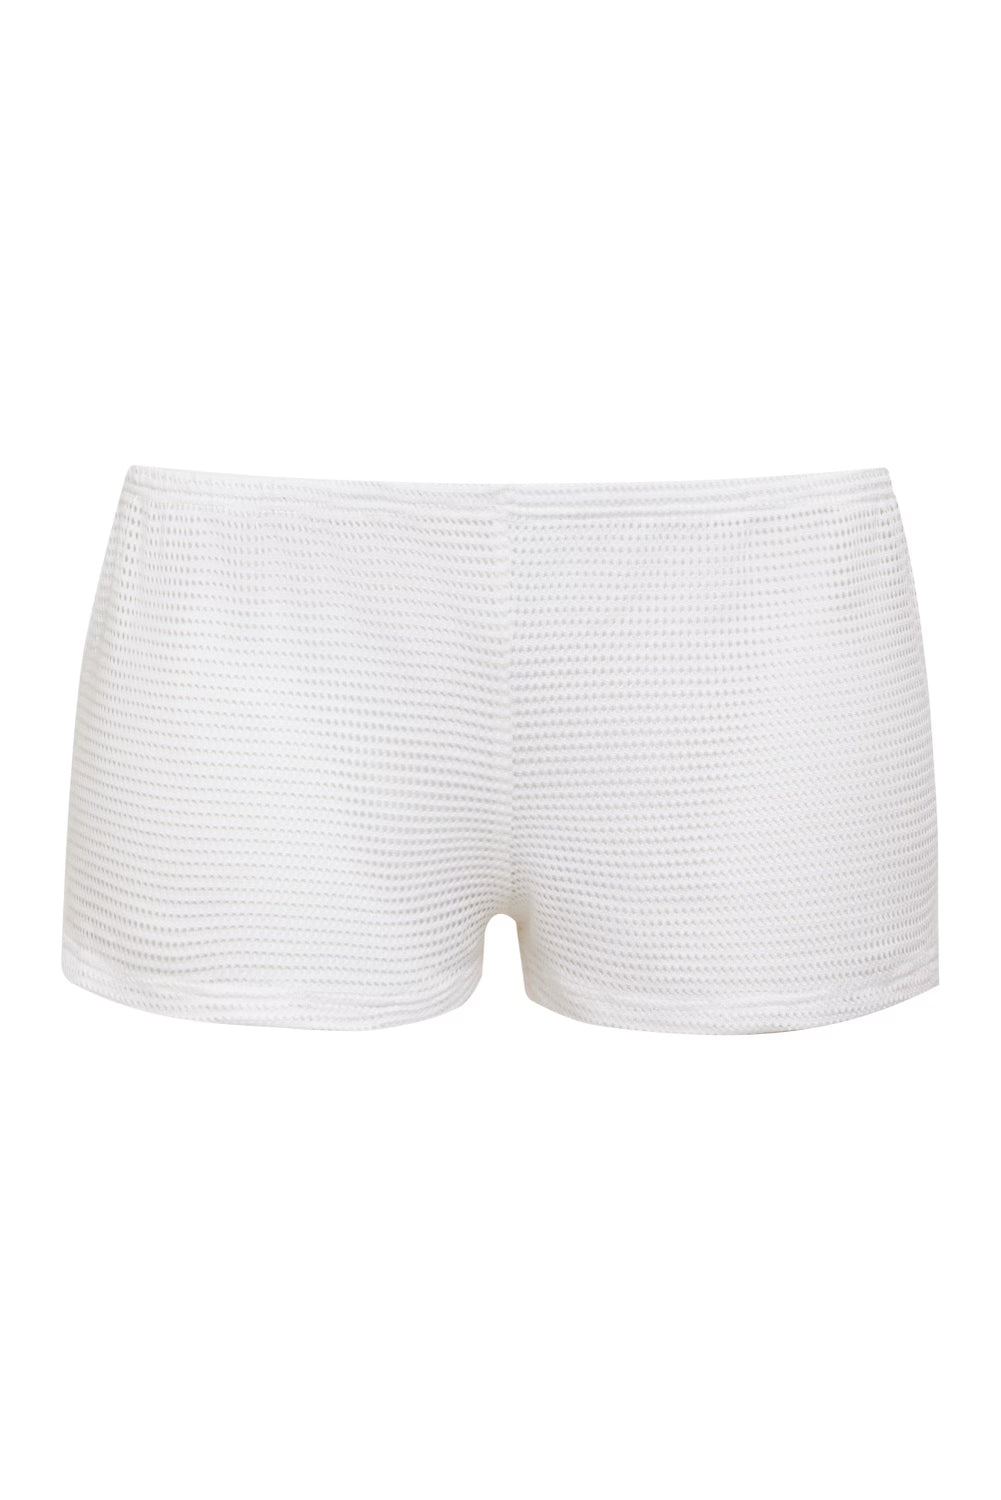 the teddy short in white